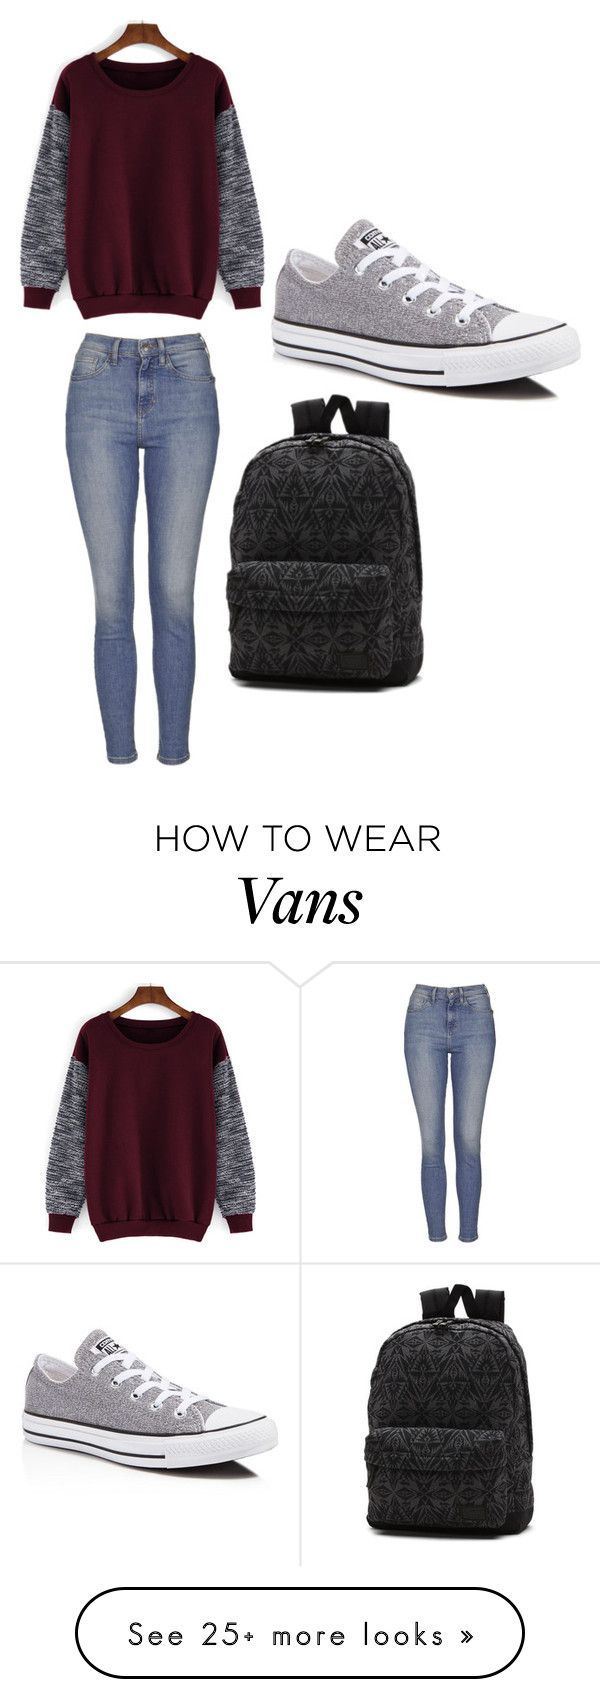 “Untitled #1437” by cynthiamonica on Polyvore featuring Topshop, Converse, Vans, women’s clothing, wom